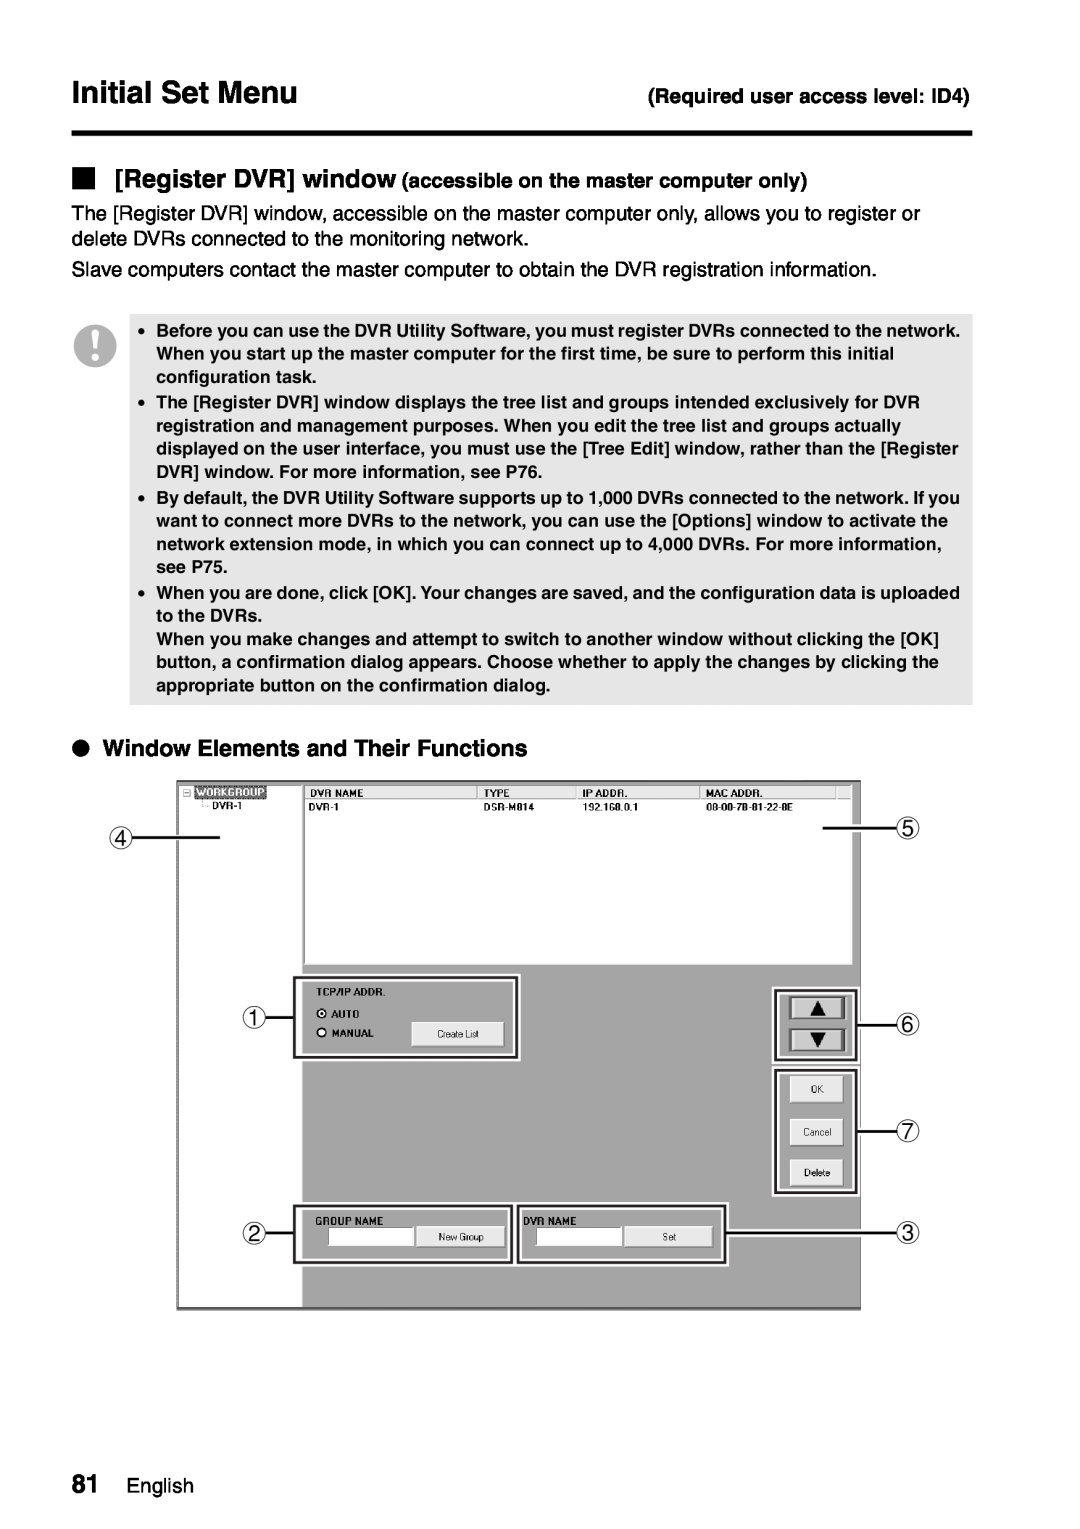 Sanyo VA-SW8000 4 1 2, 5 6 7 3, Initial Set Menu, Window Elements and Their Functions, Required user access level: ID4 